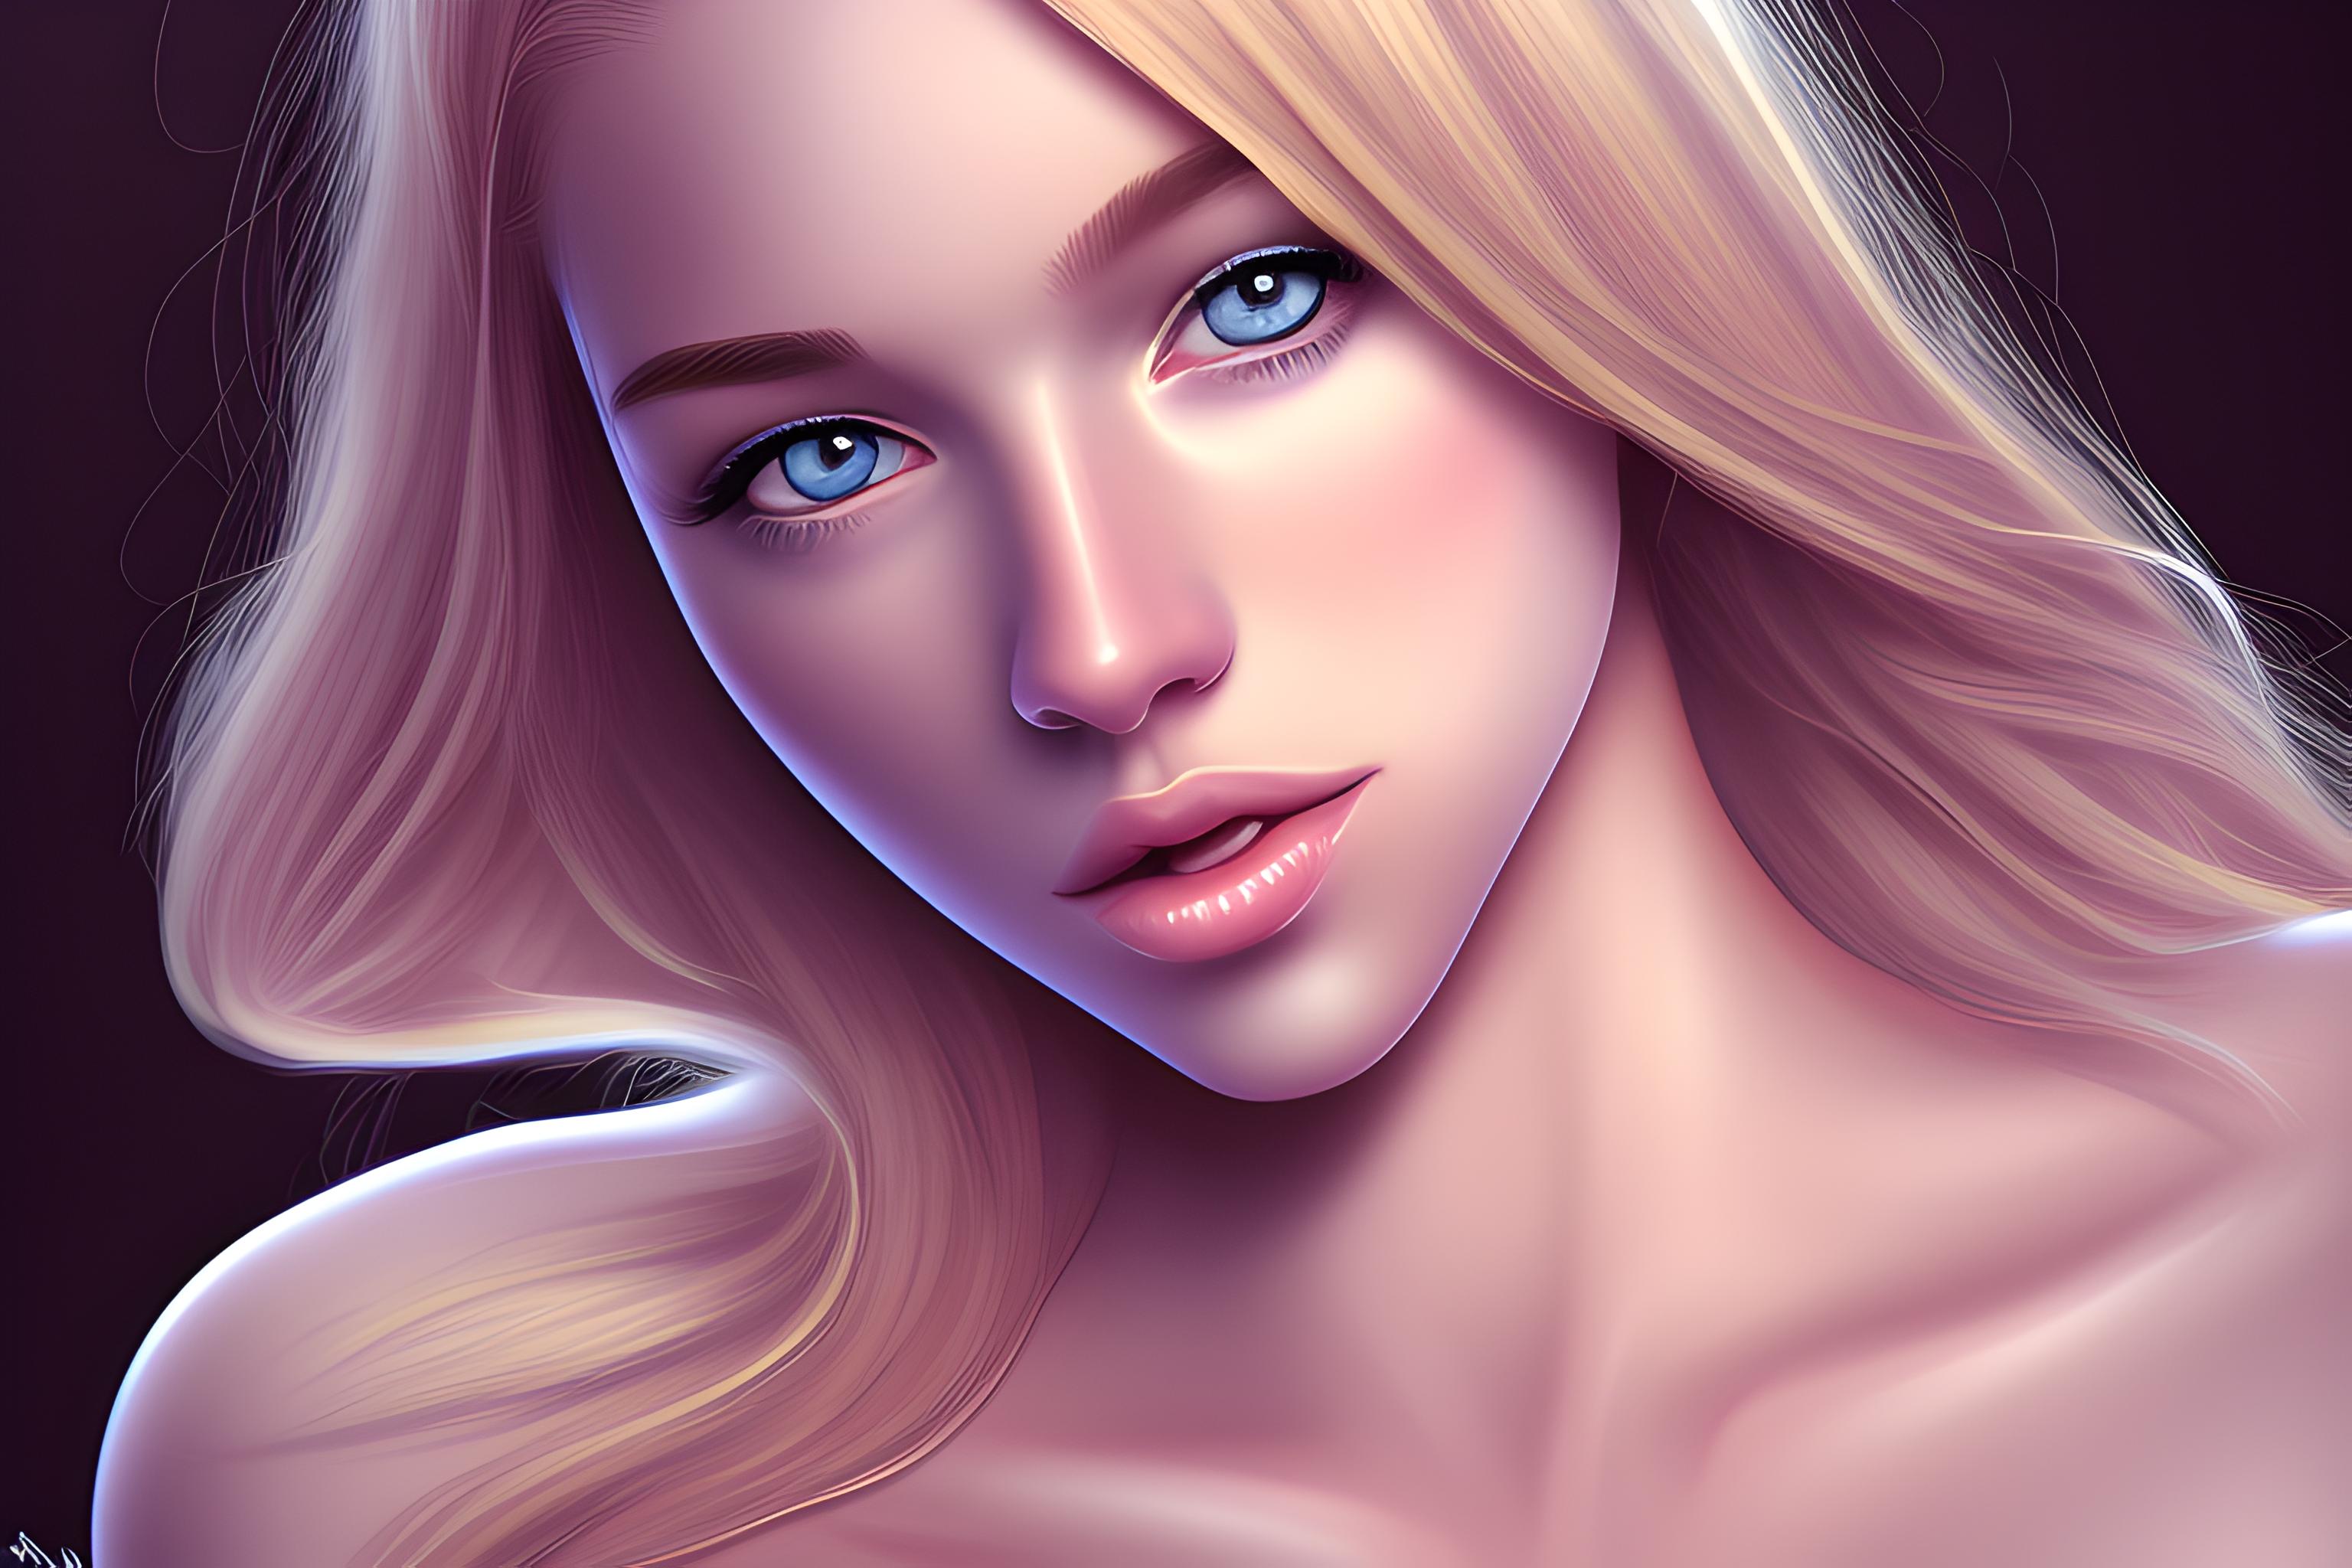 Blonde Teen With A Seductive Look Naked Wallpapersai 